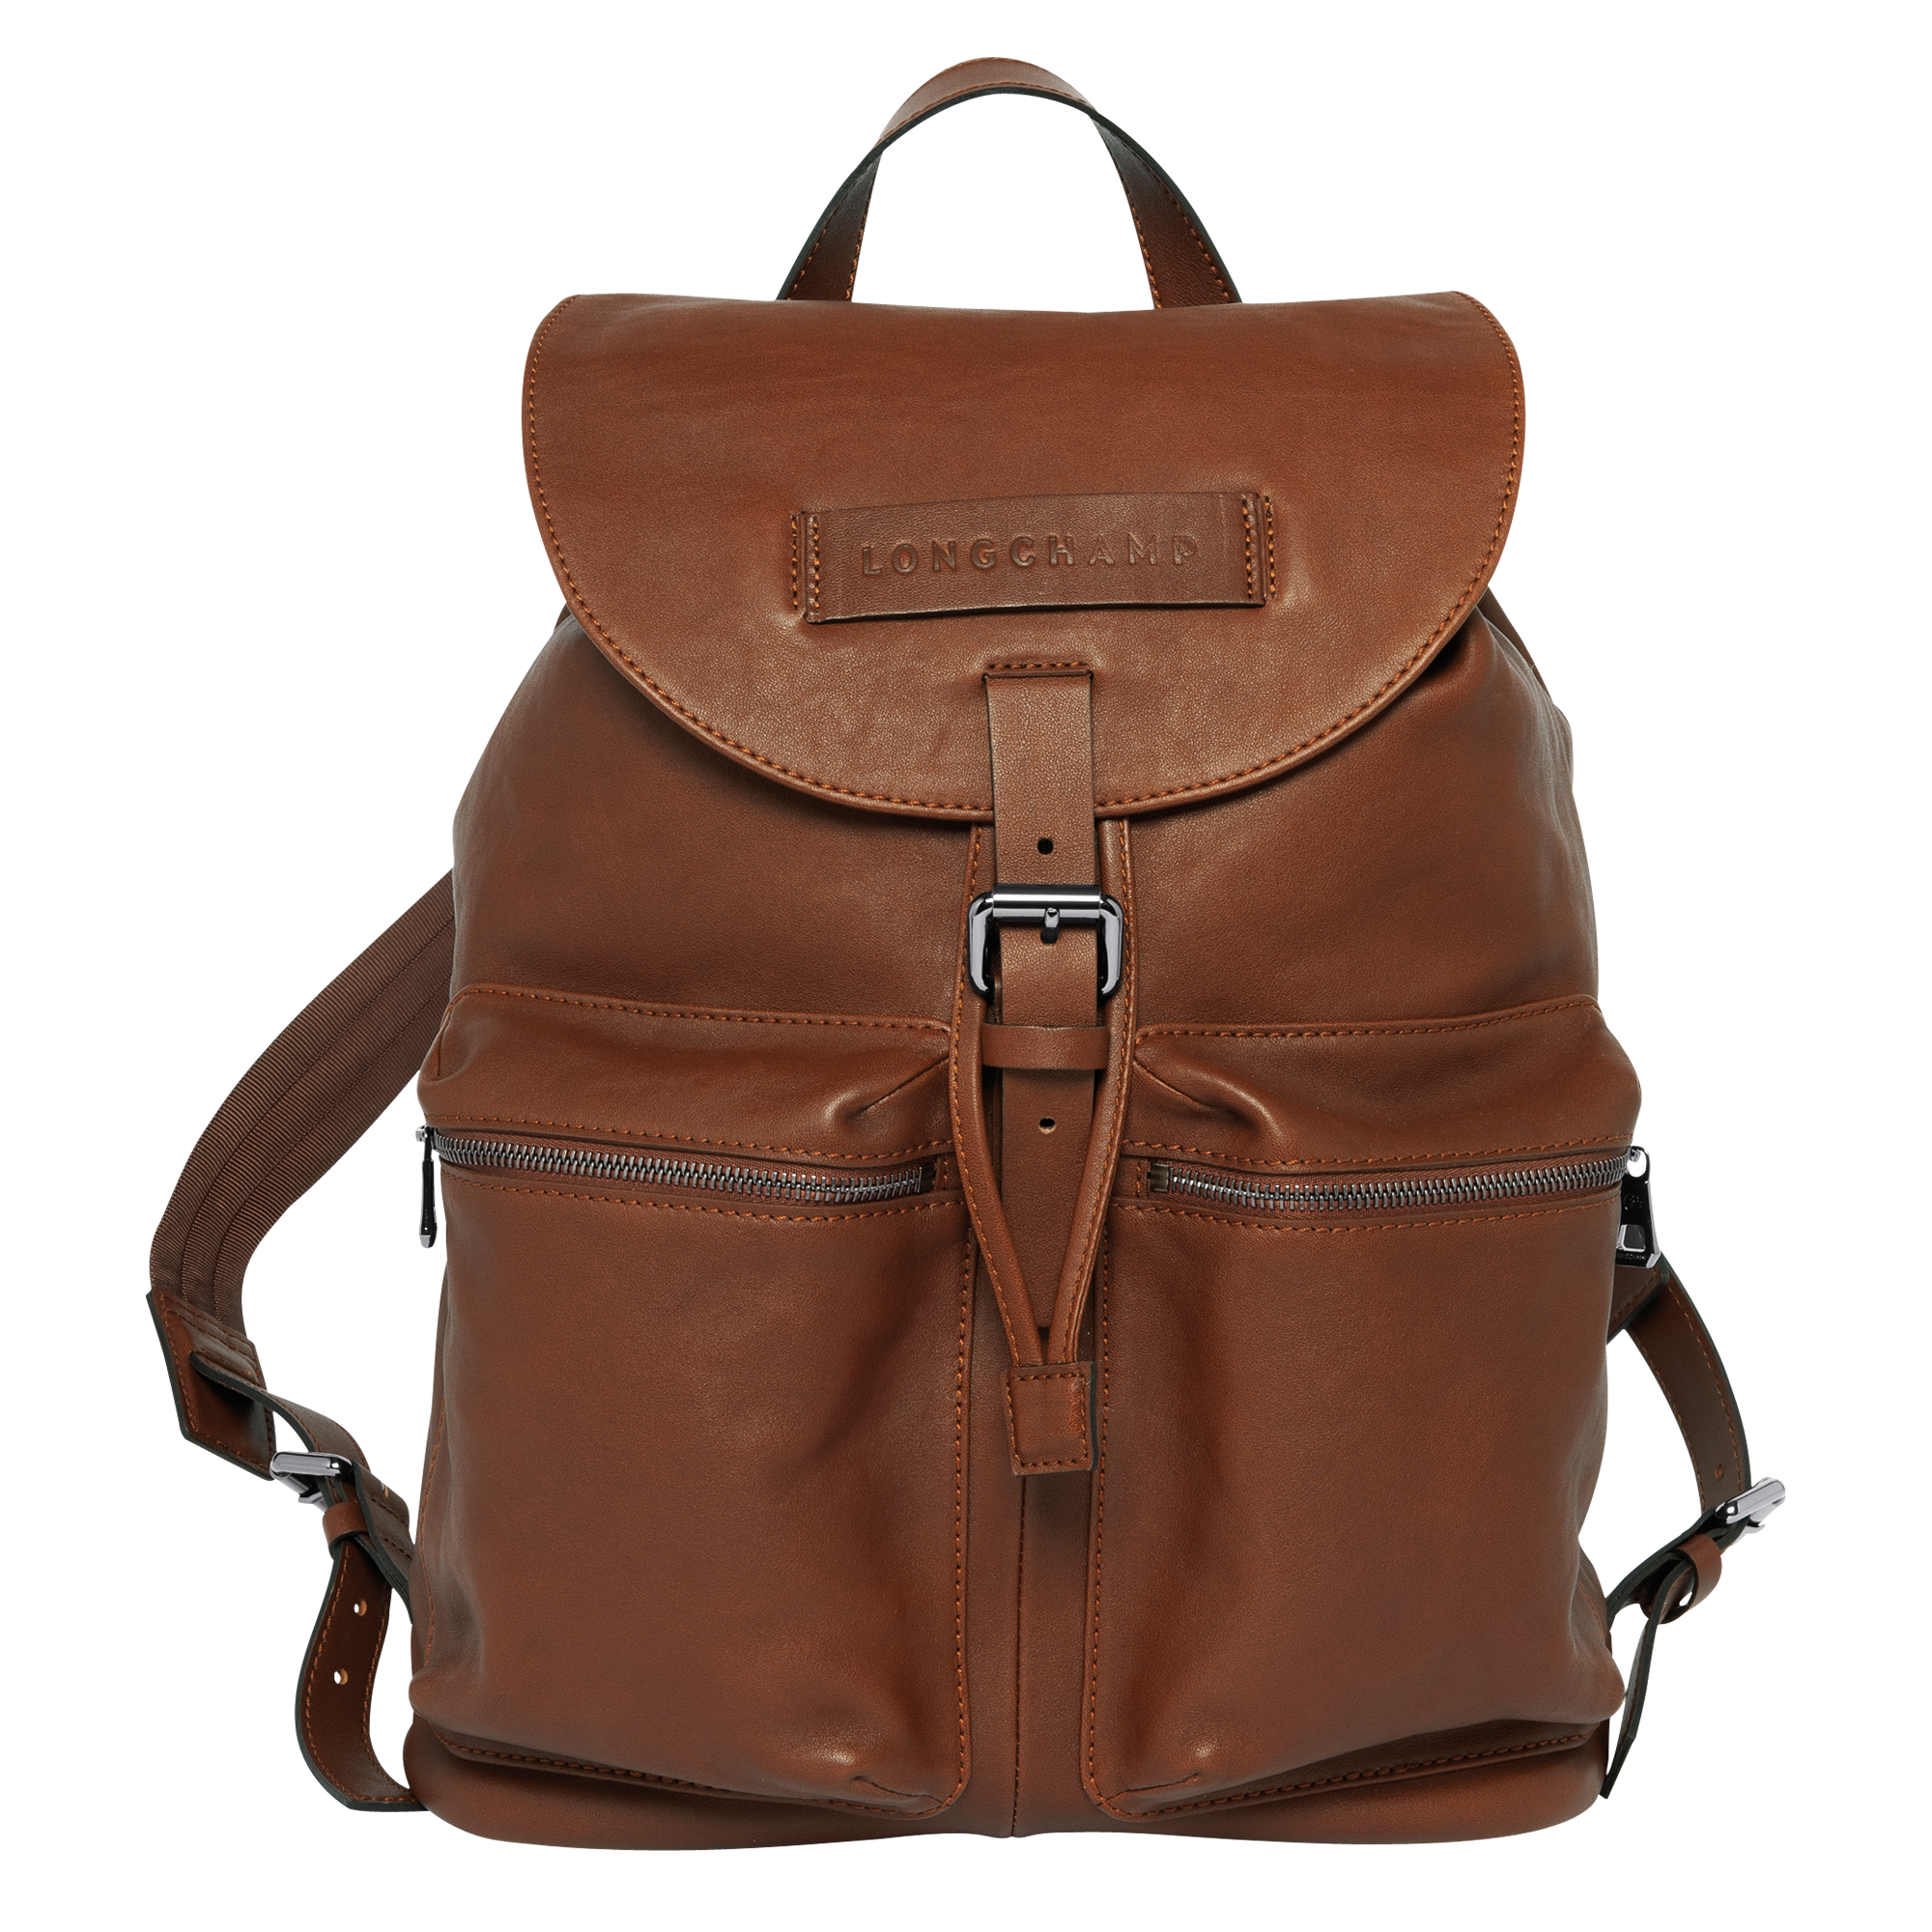 long champs backpack